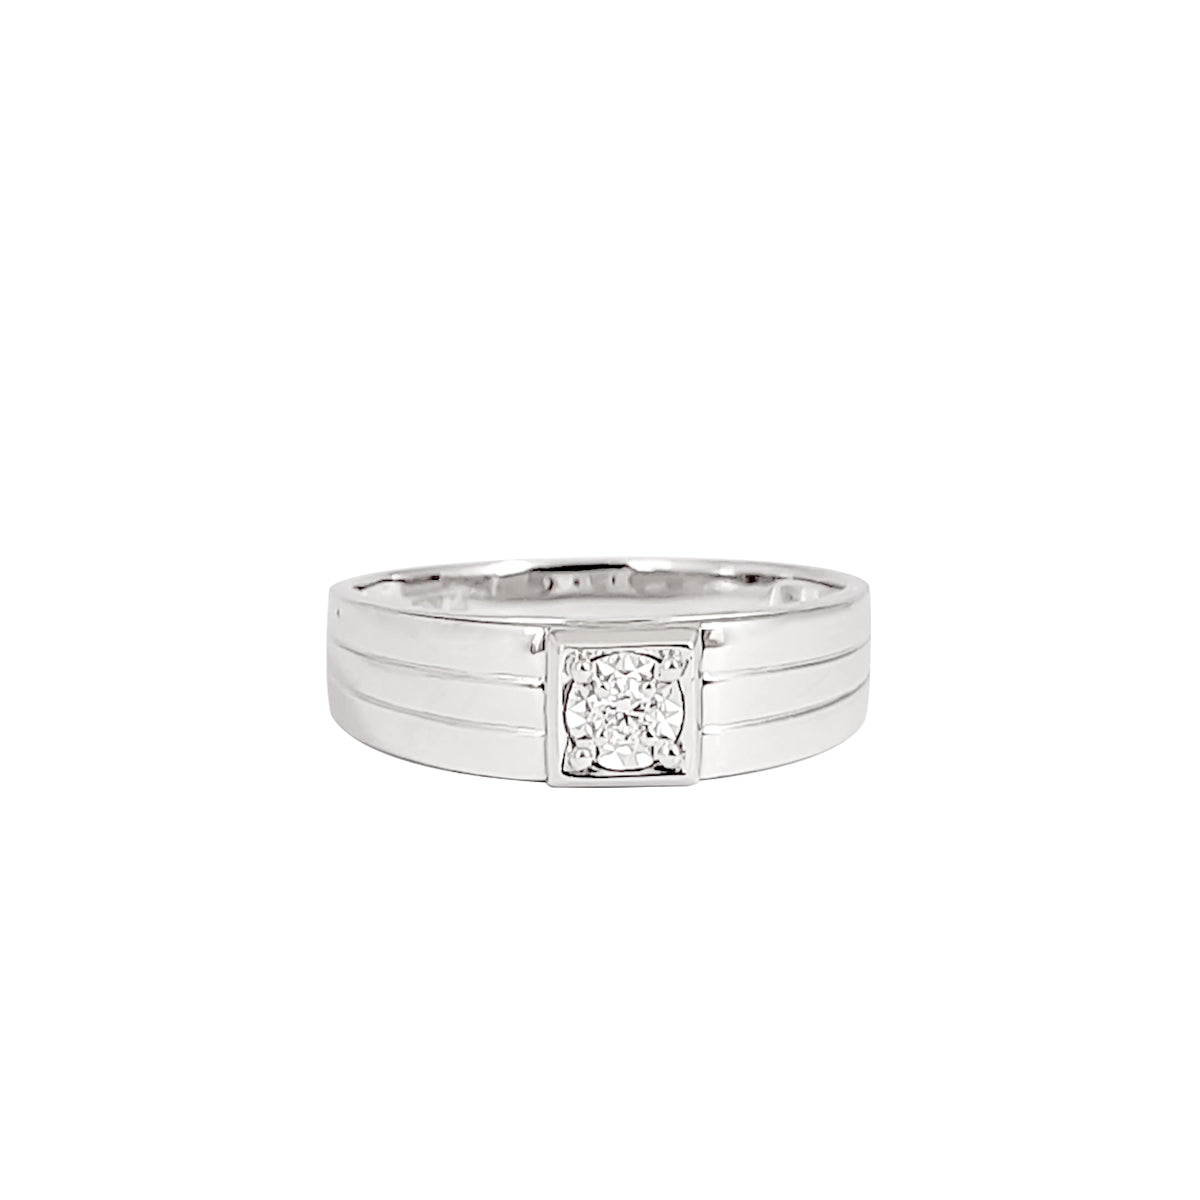 Diamond Engagement Band | Gold Diamond Ring | Meicel Jewelry Store